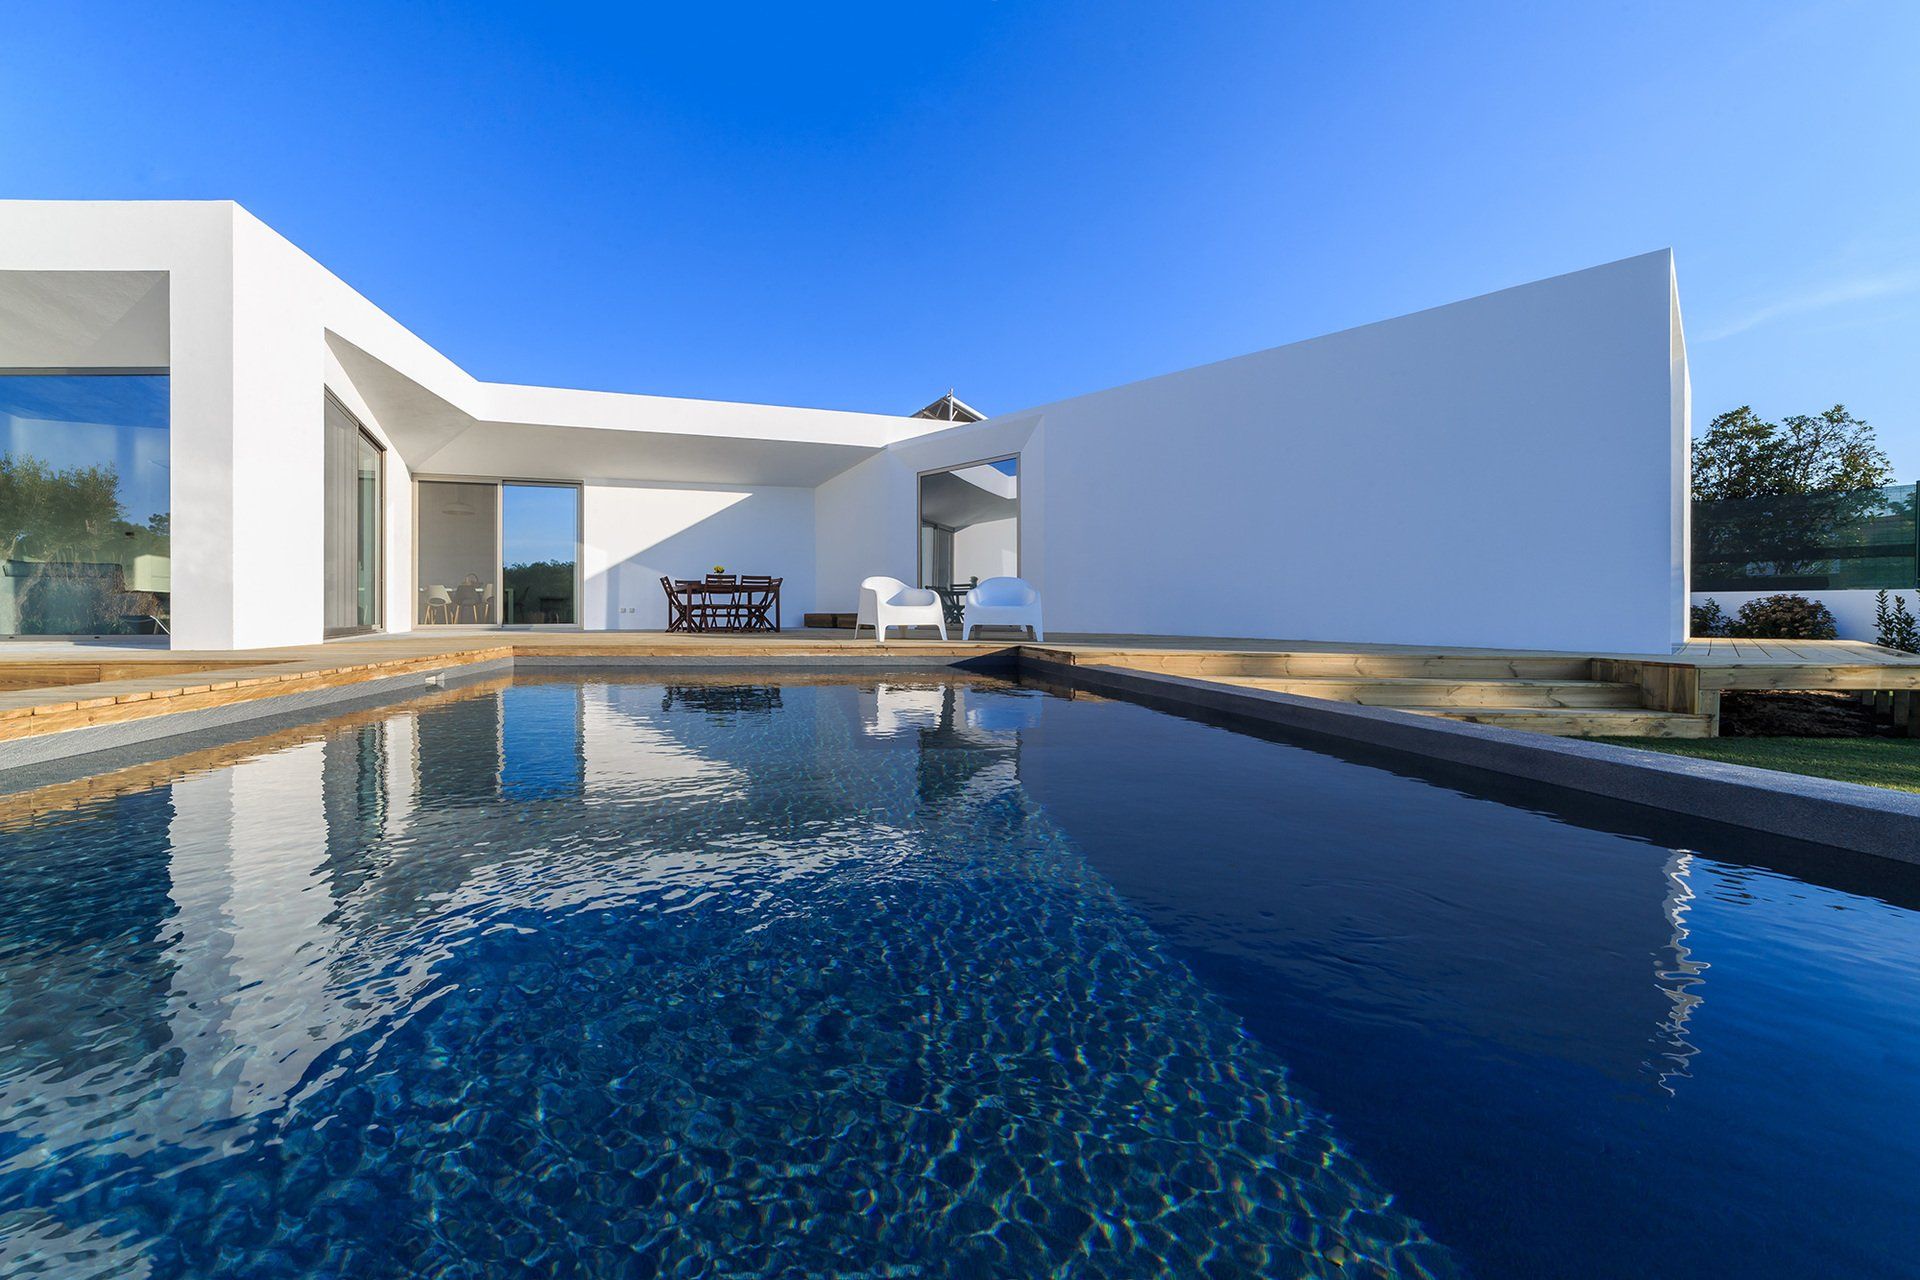 A modern house with a large swimming pool in front of it.